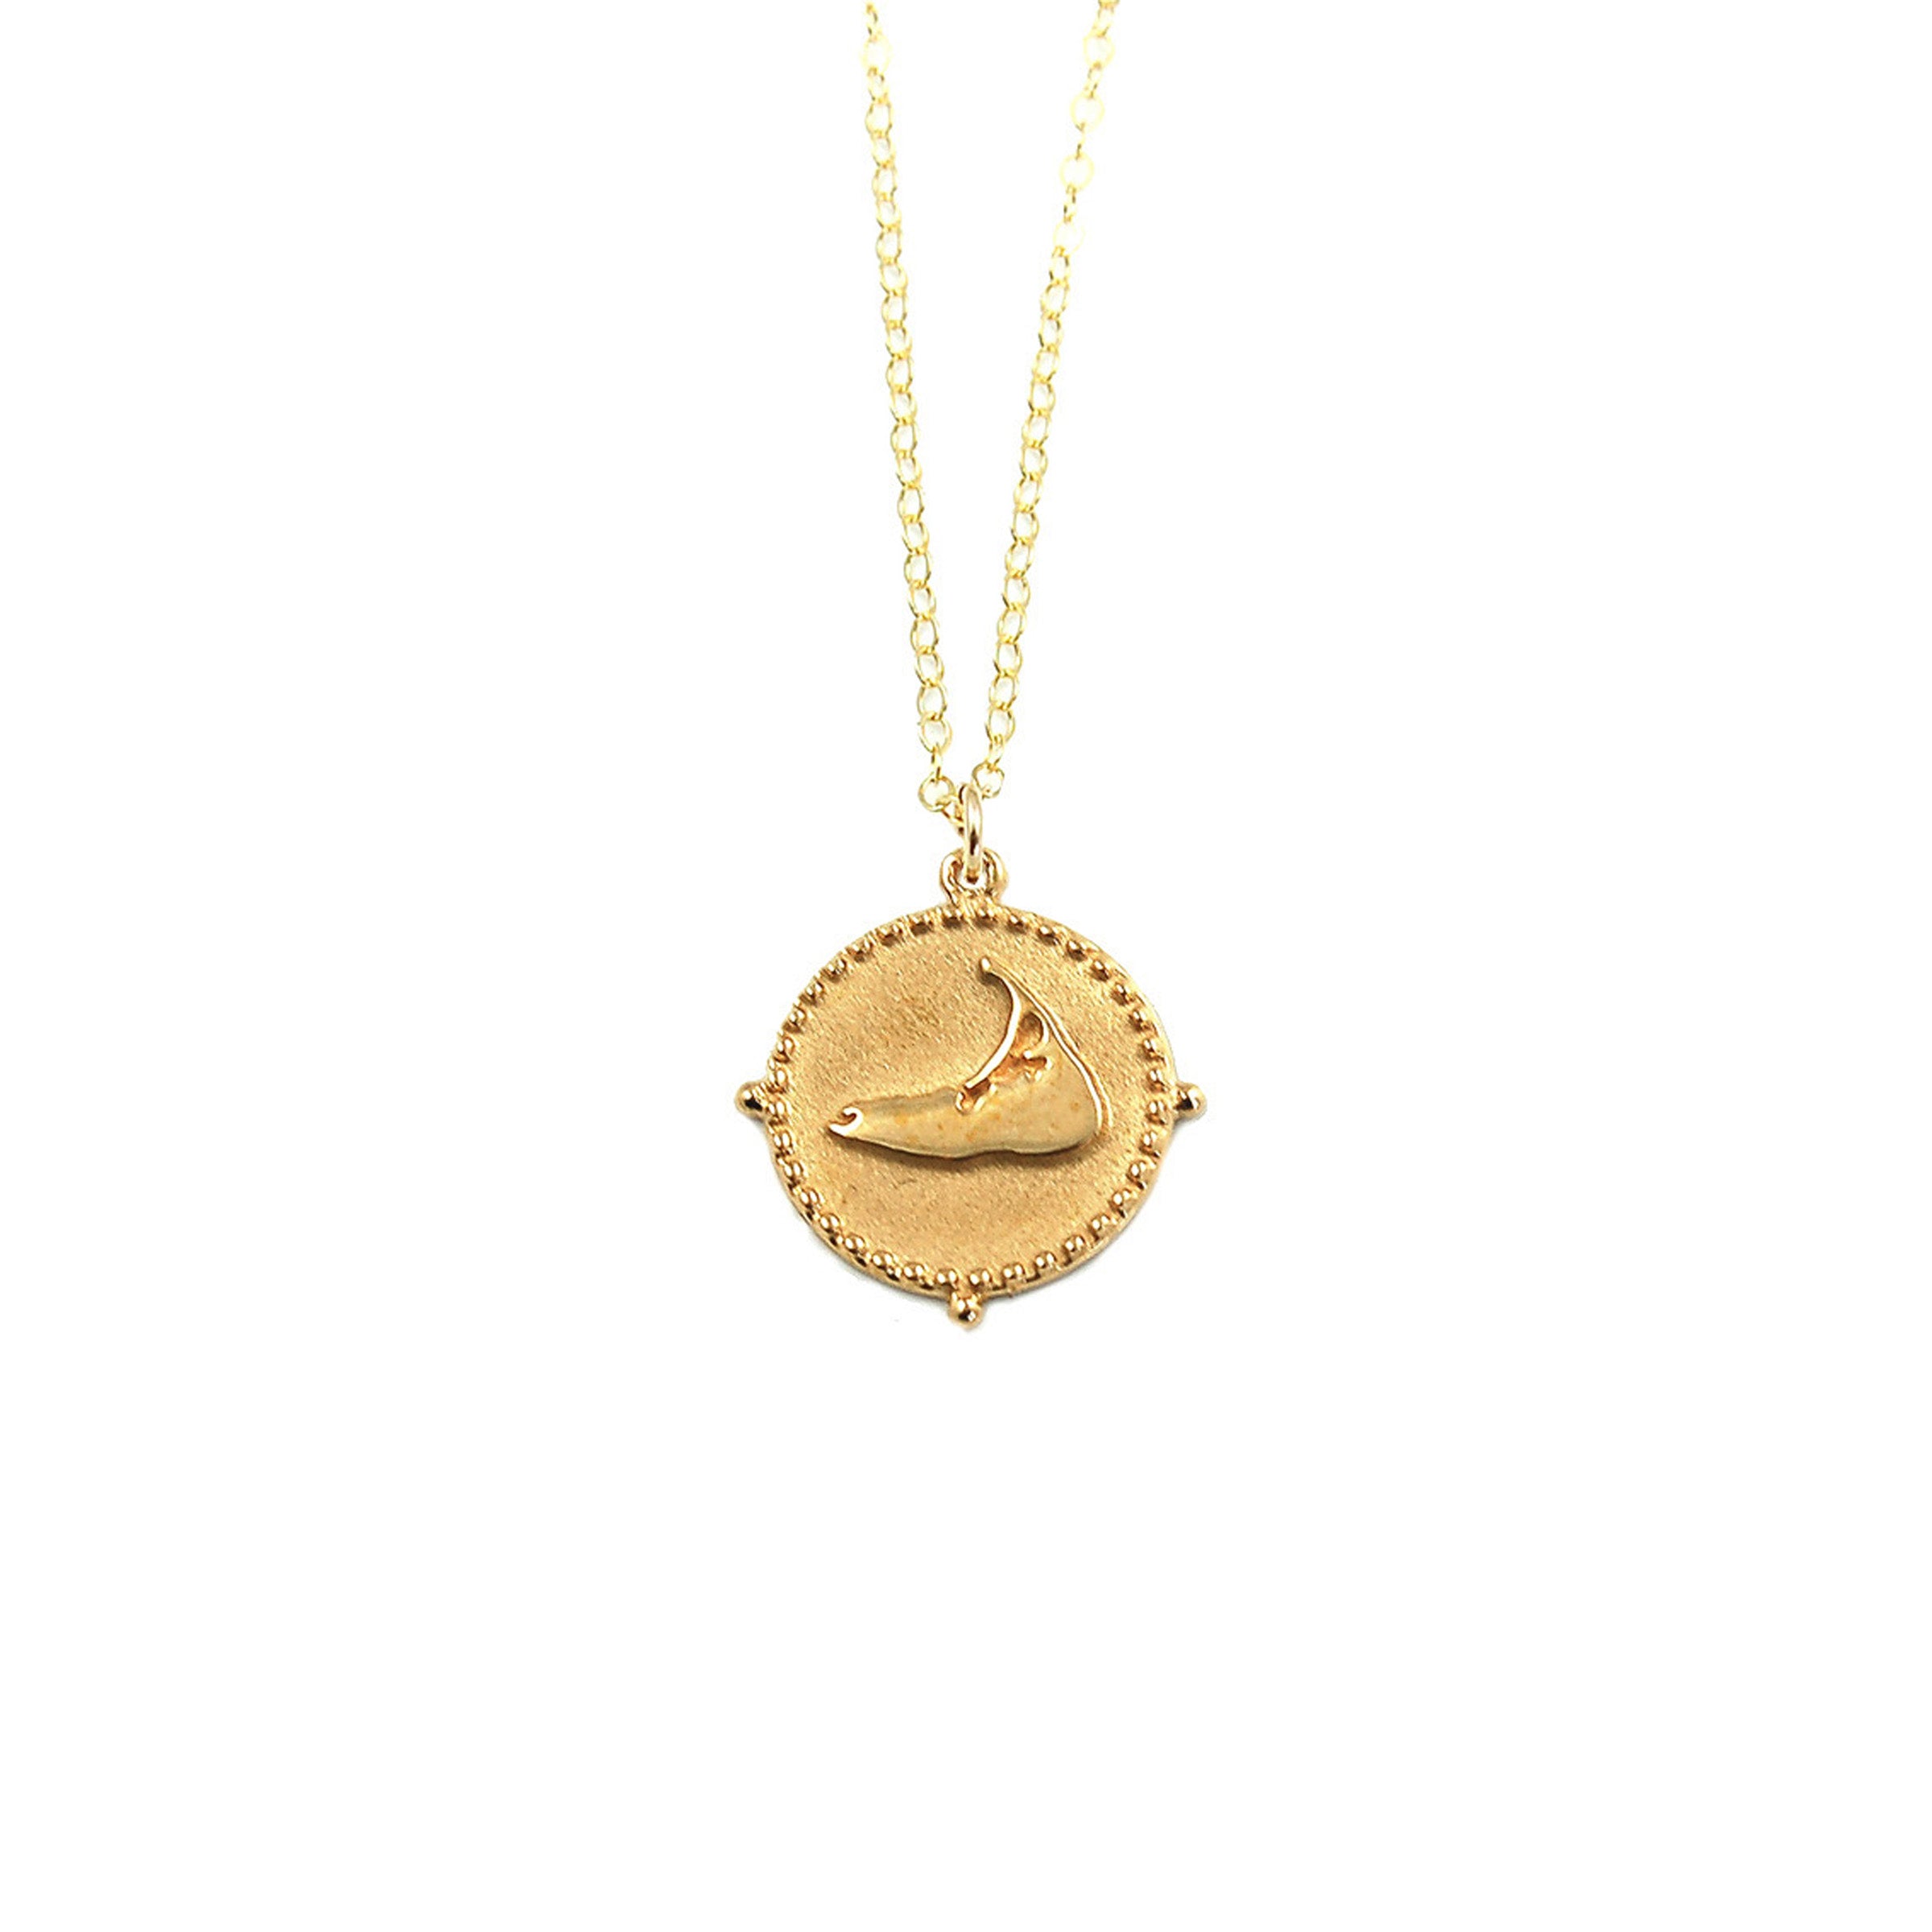 Nantucket Points Necklace ©